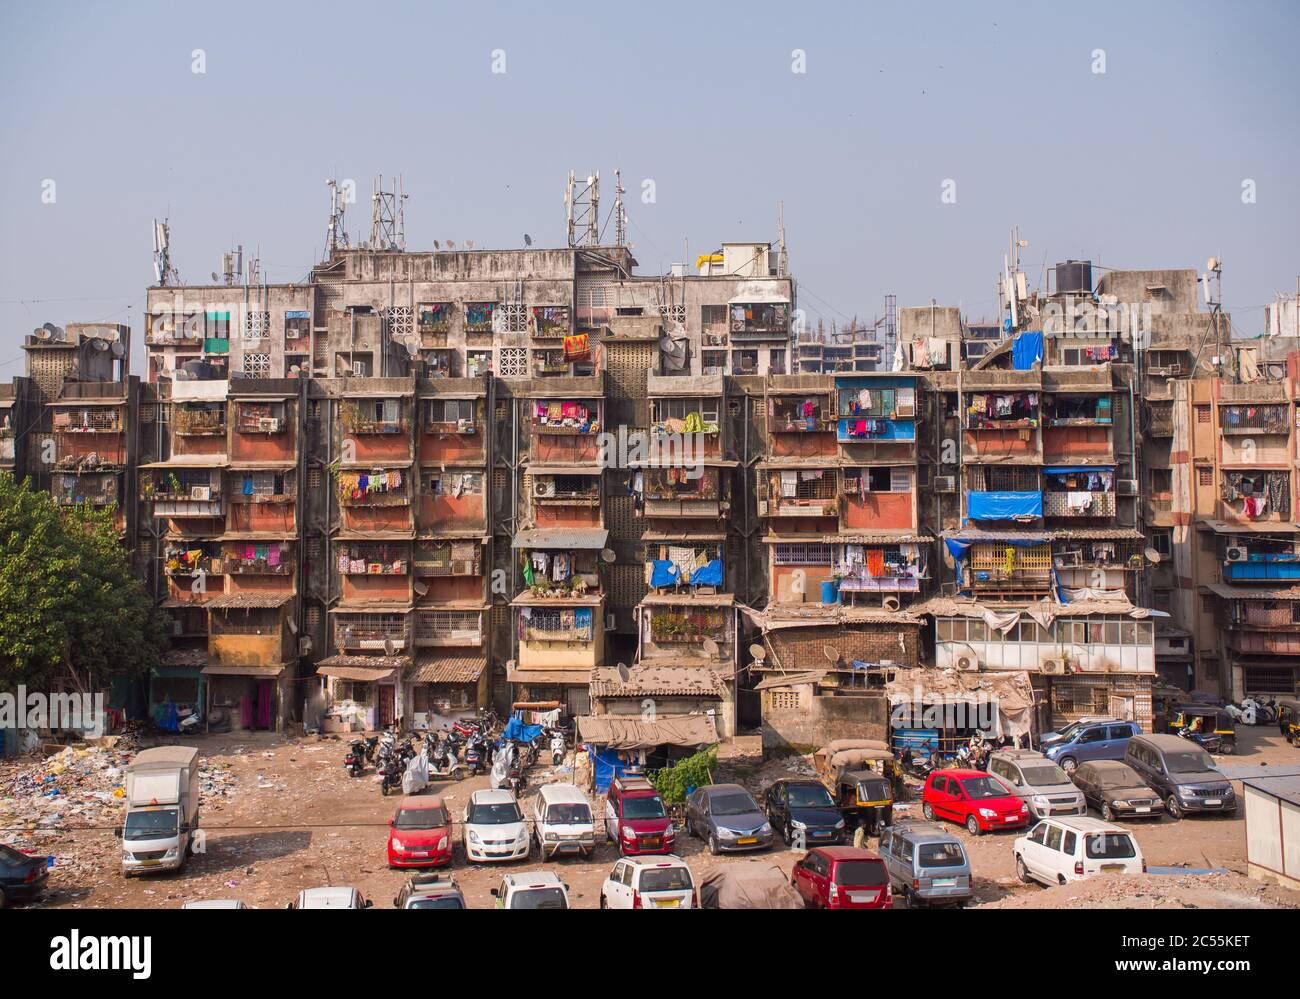 Residential building in the slums of Mumbai. Stock Photo